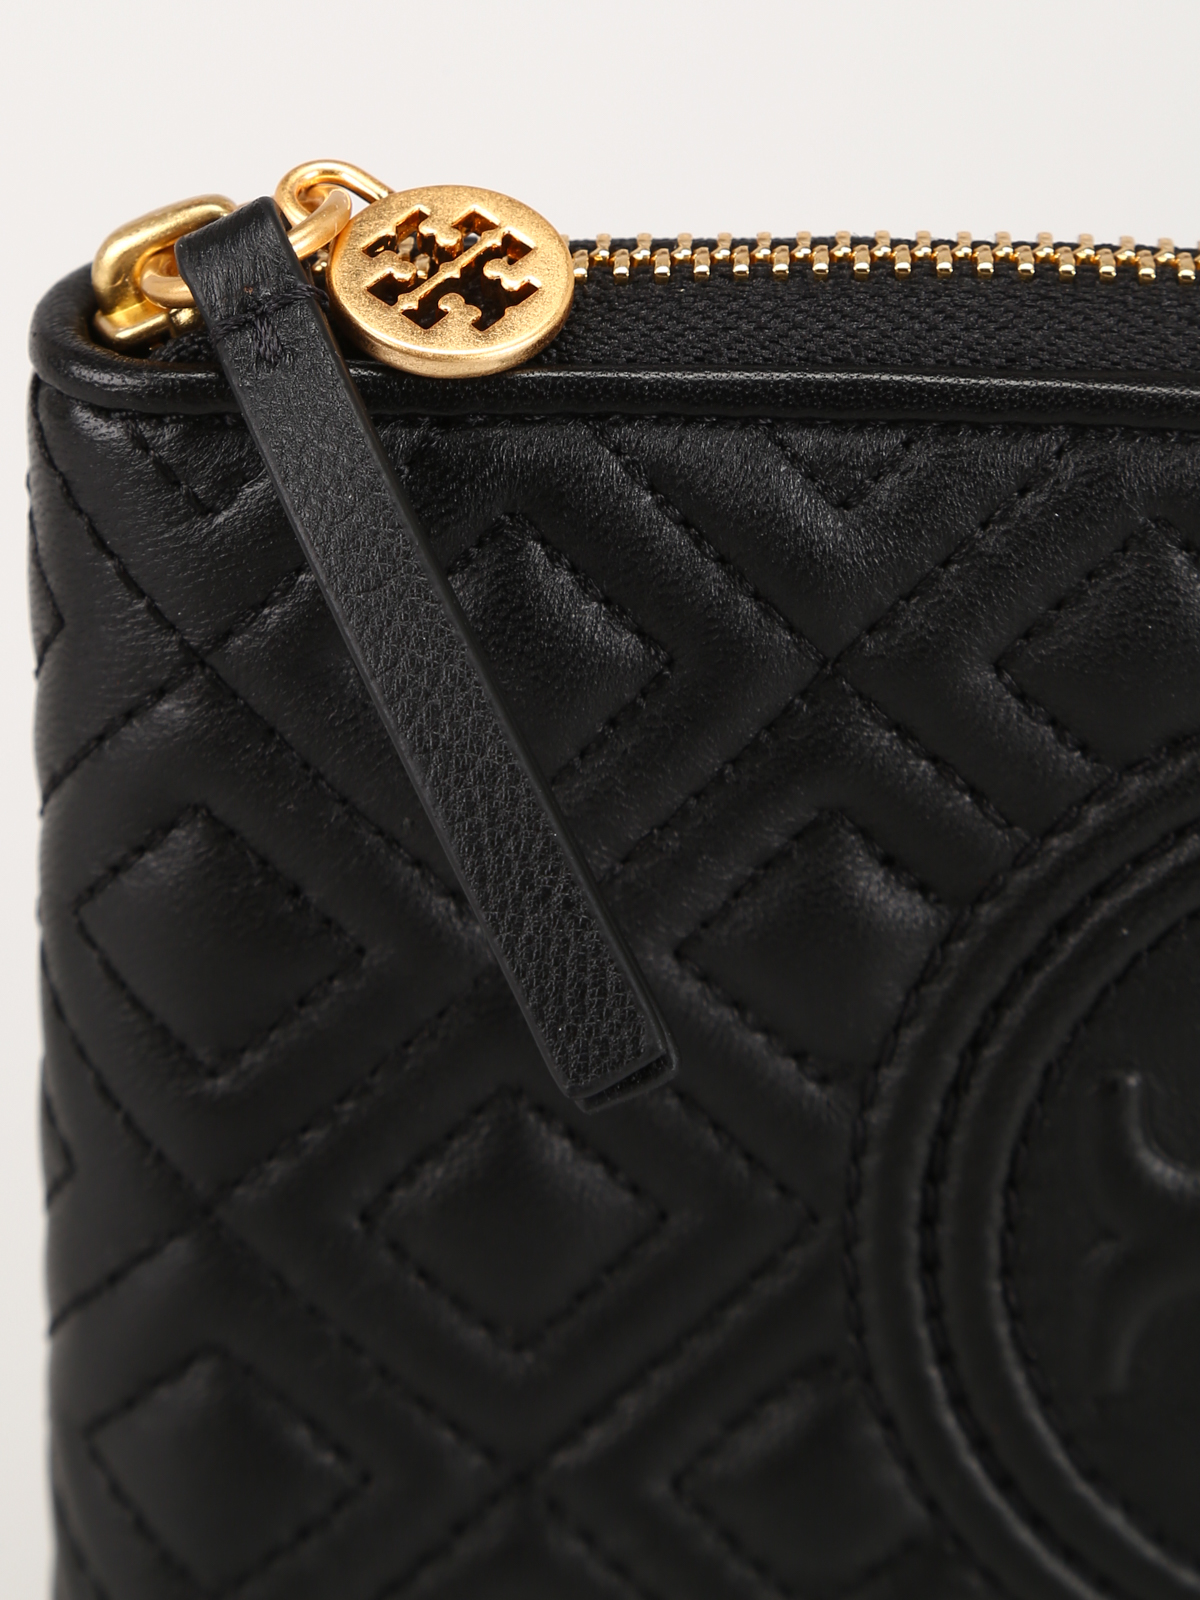 Wallets & purses Tory Burch - Fleming black quilted leather medium wallet -  50264001